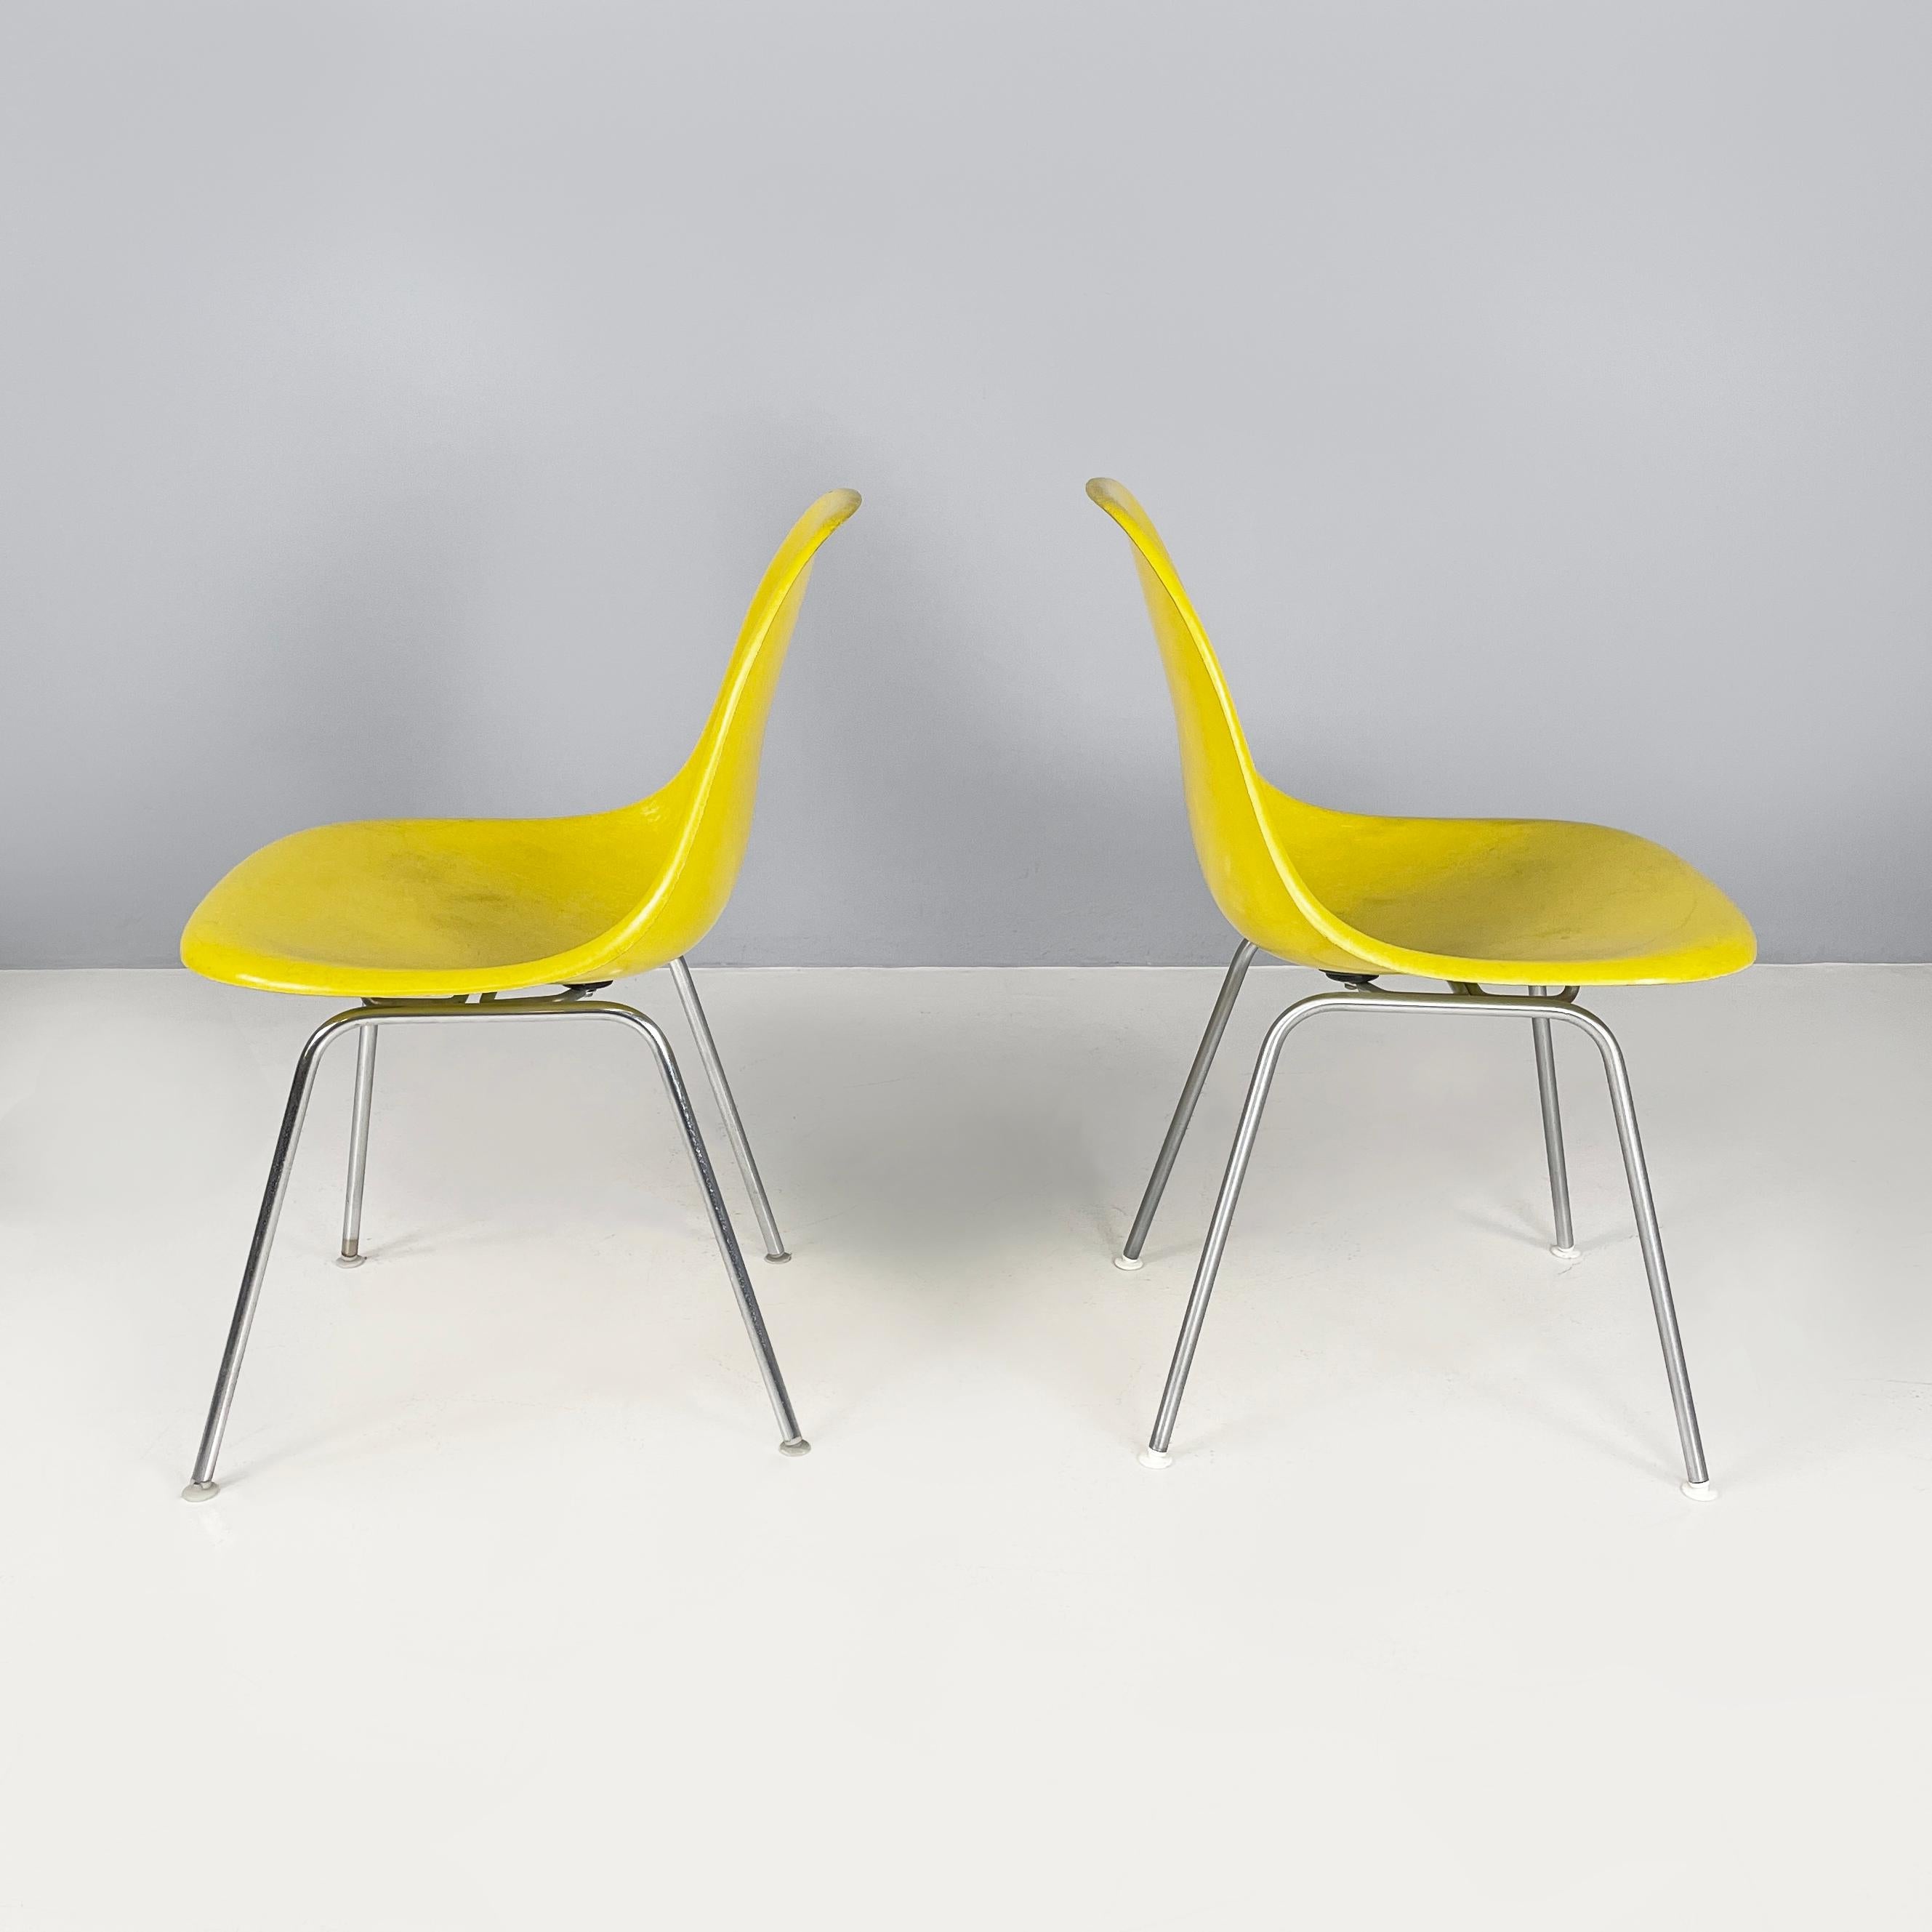 Modern American Yellow Shell Chairs by Charles and Ray Eames for Herman Miller, 1970s For Sale